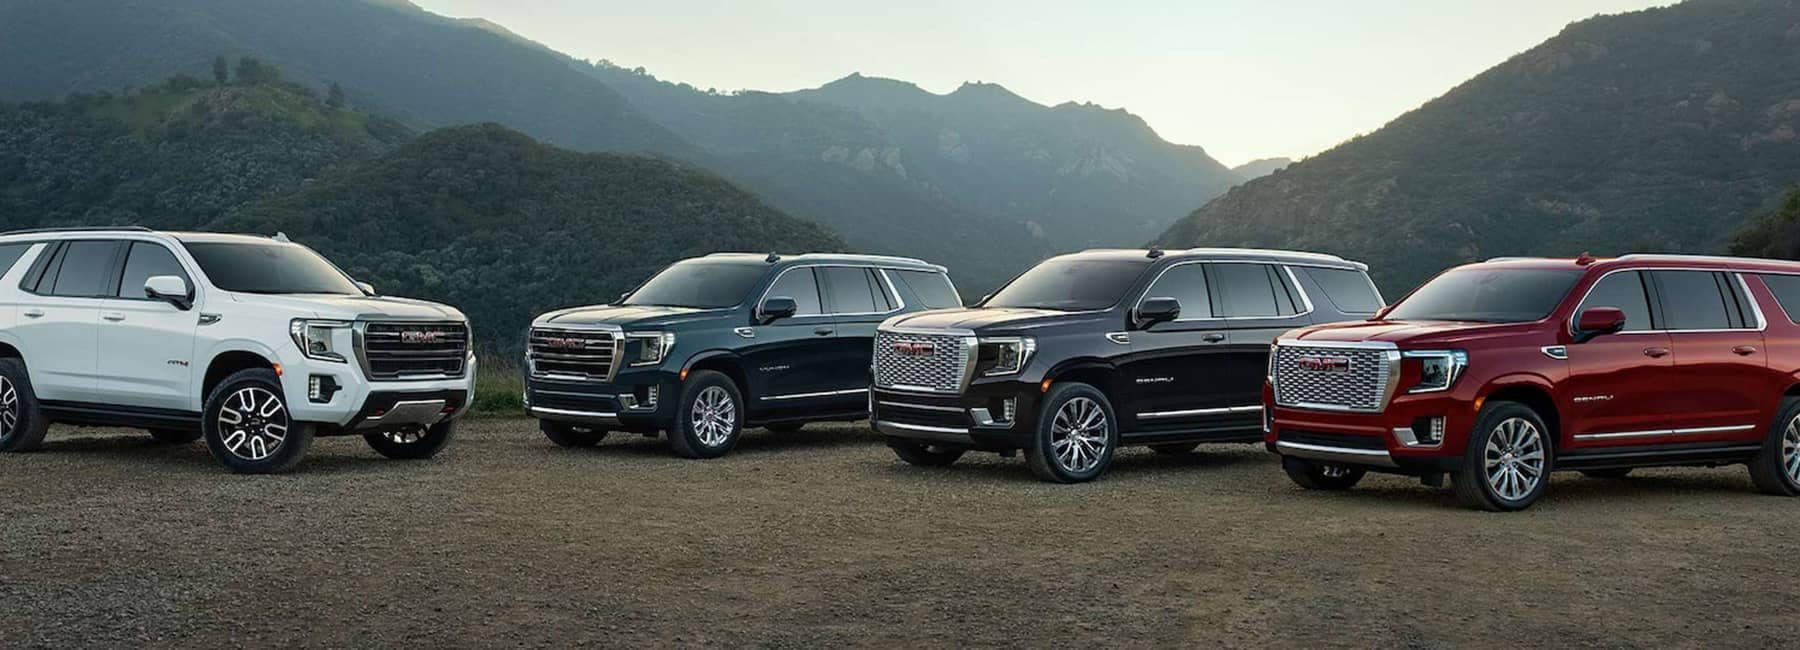 Group of 2023 GMC Yukon SUVs parked in mountains